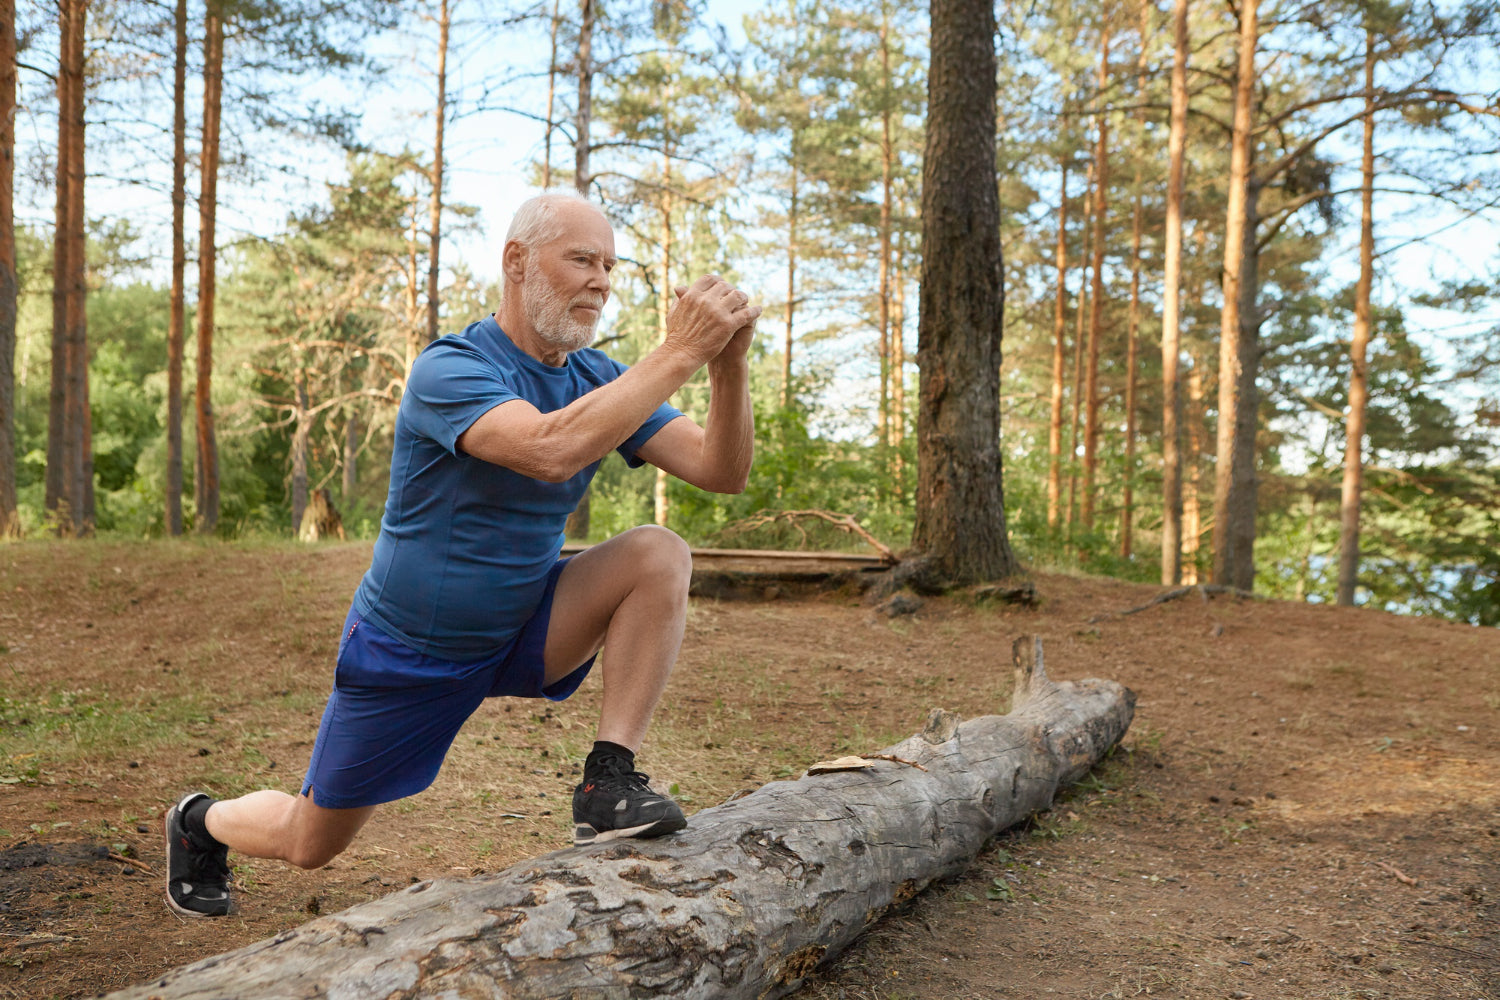 And old man showing increased physical performance after taking TMG supplements